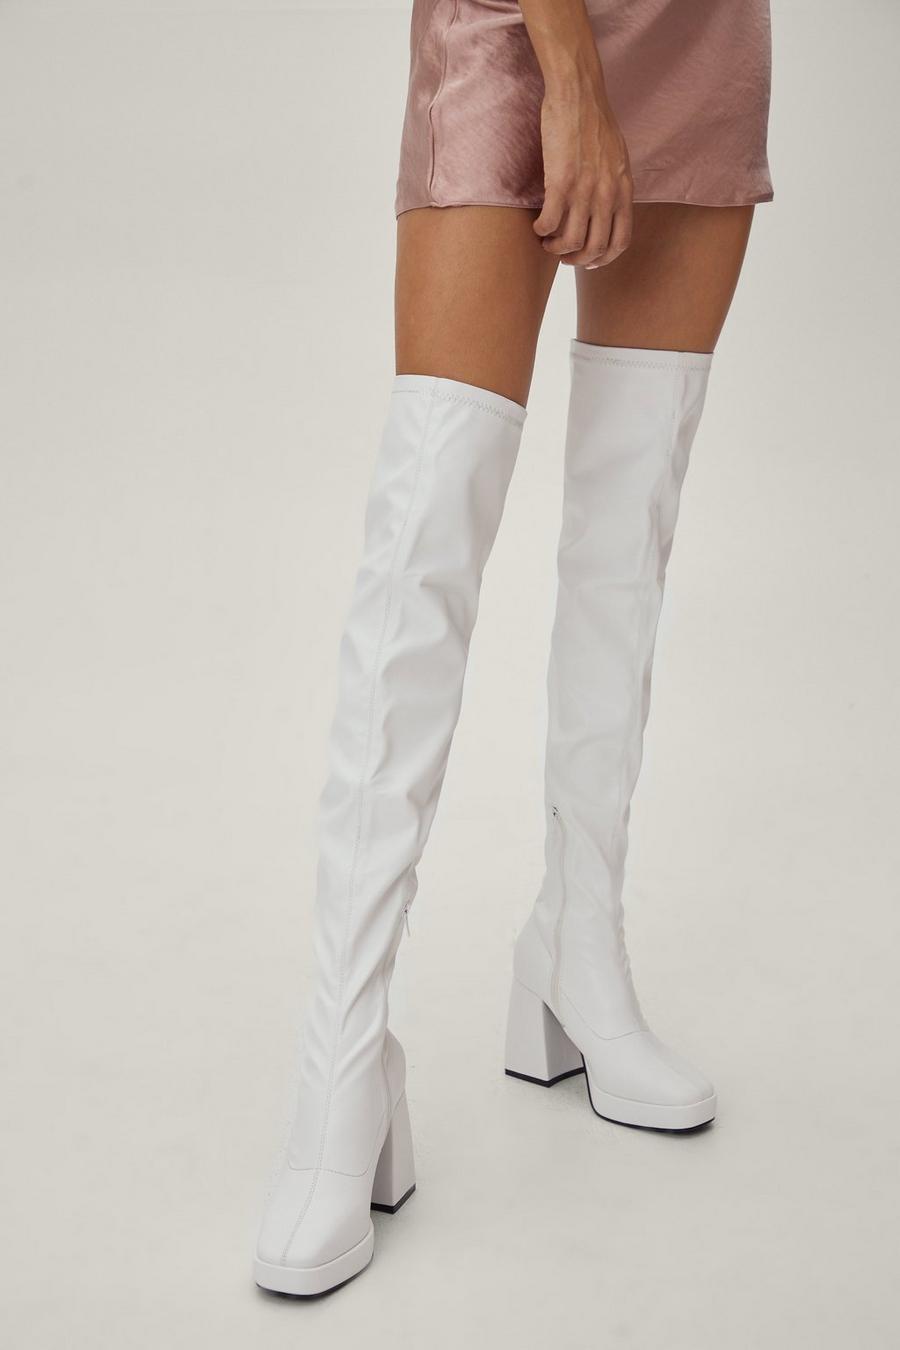 Faux Leather Thigh High Platform Boots